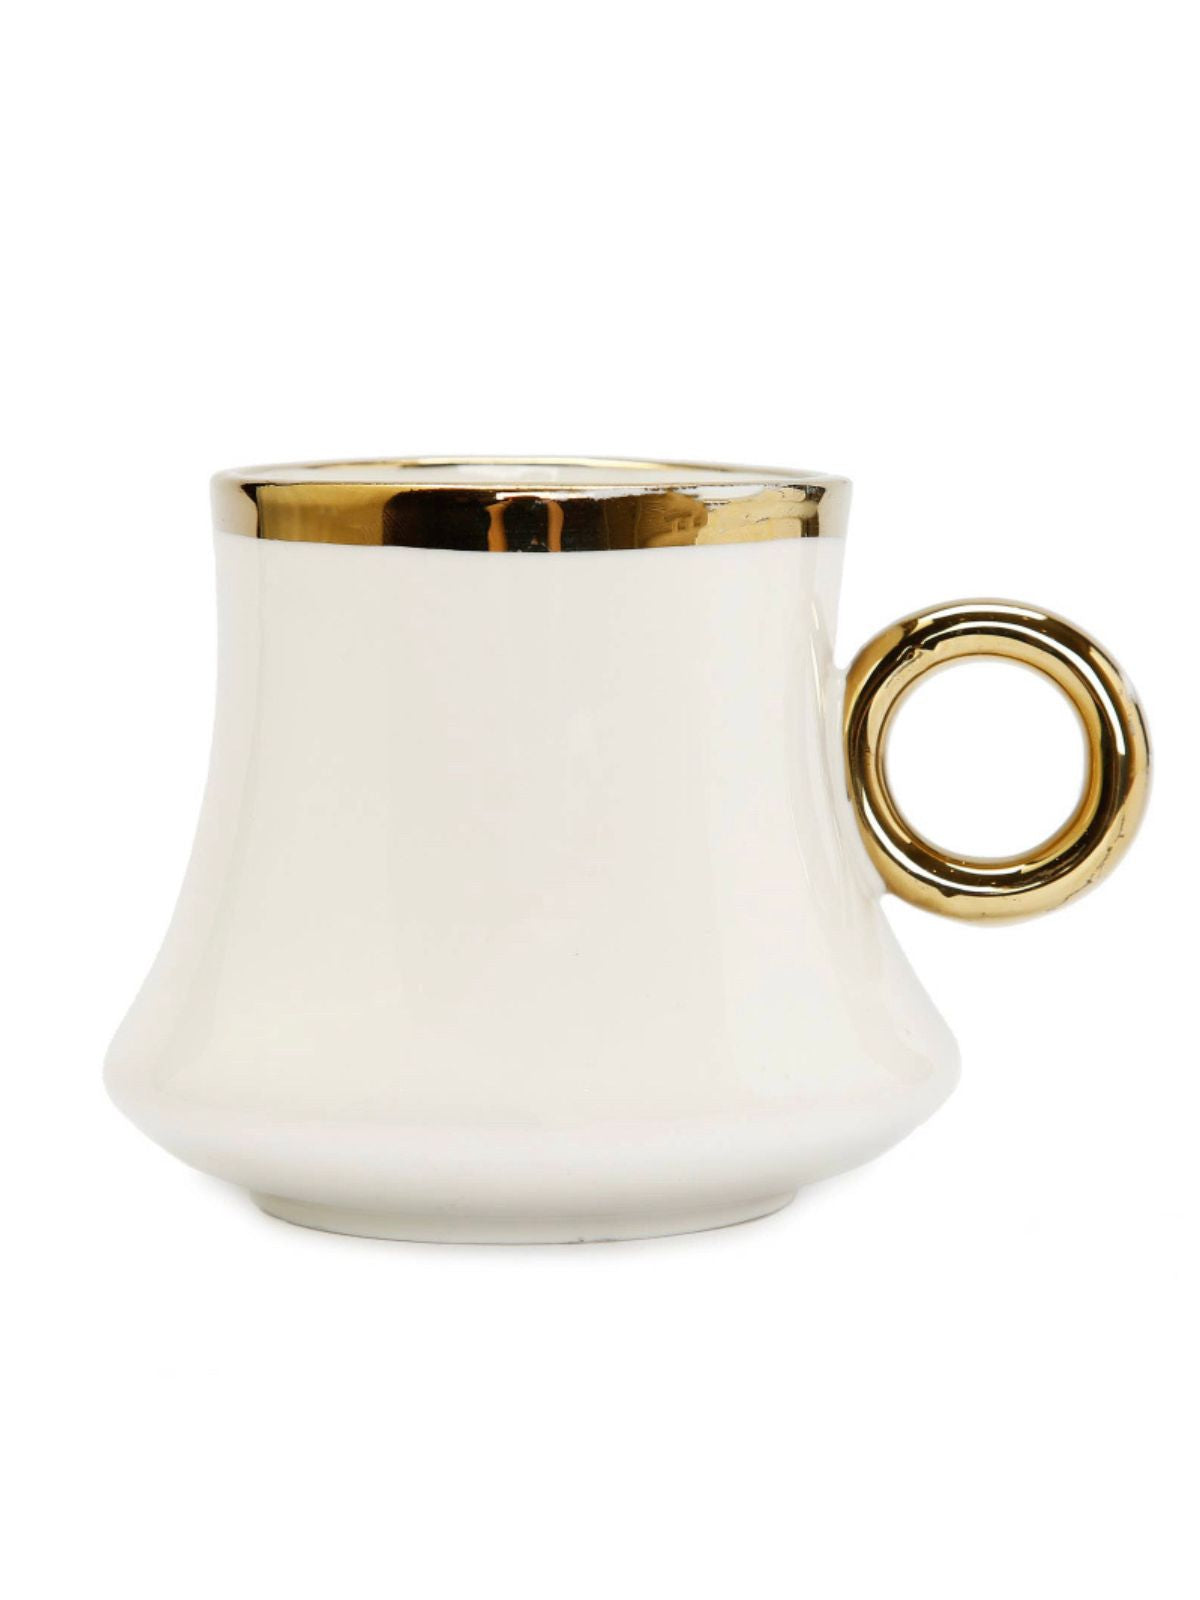 This is a gorgeous white and gold coffee mug with beautiful gold handle. This mug and saucer set is sure to become a favorite on your coffee station.  